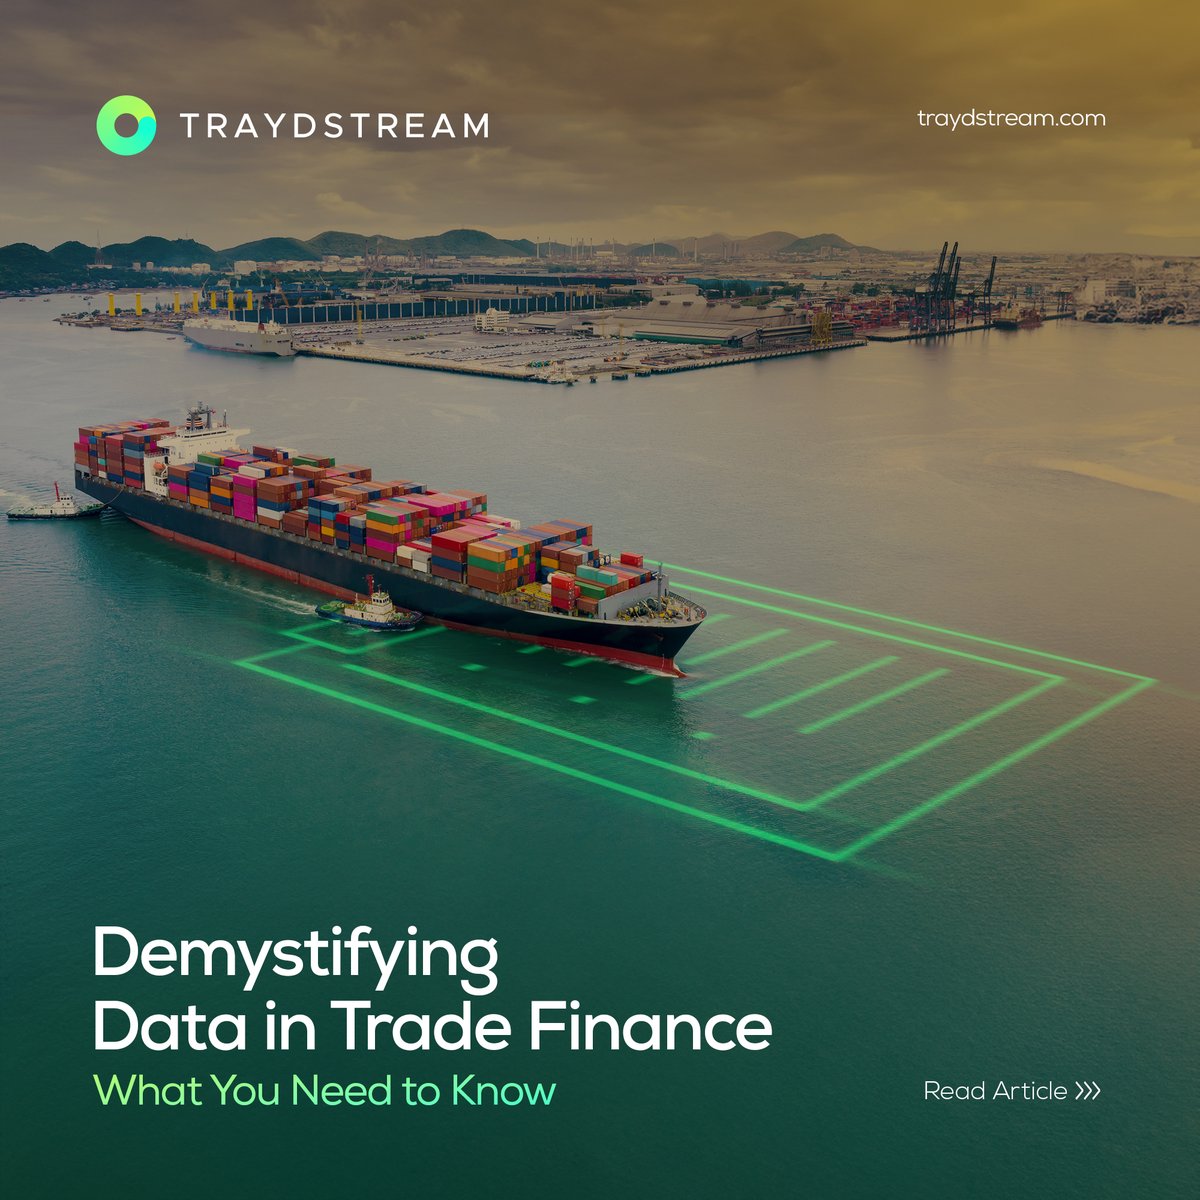 Dive into the world of data in trade finance with our latest article! Explore the types of data collected and processed in the industry, from trade documents to regulatory compliance data. 

Read more: traydstream.com/demystifying-d…

#TradeFinance #DataManagement #RiskMitigation